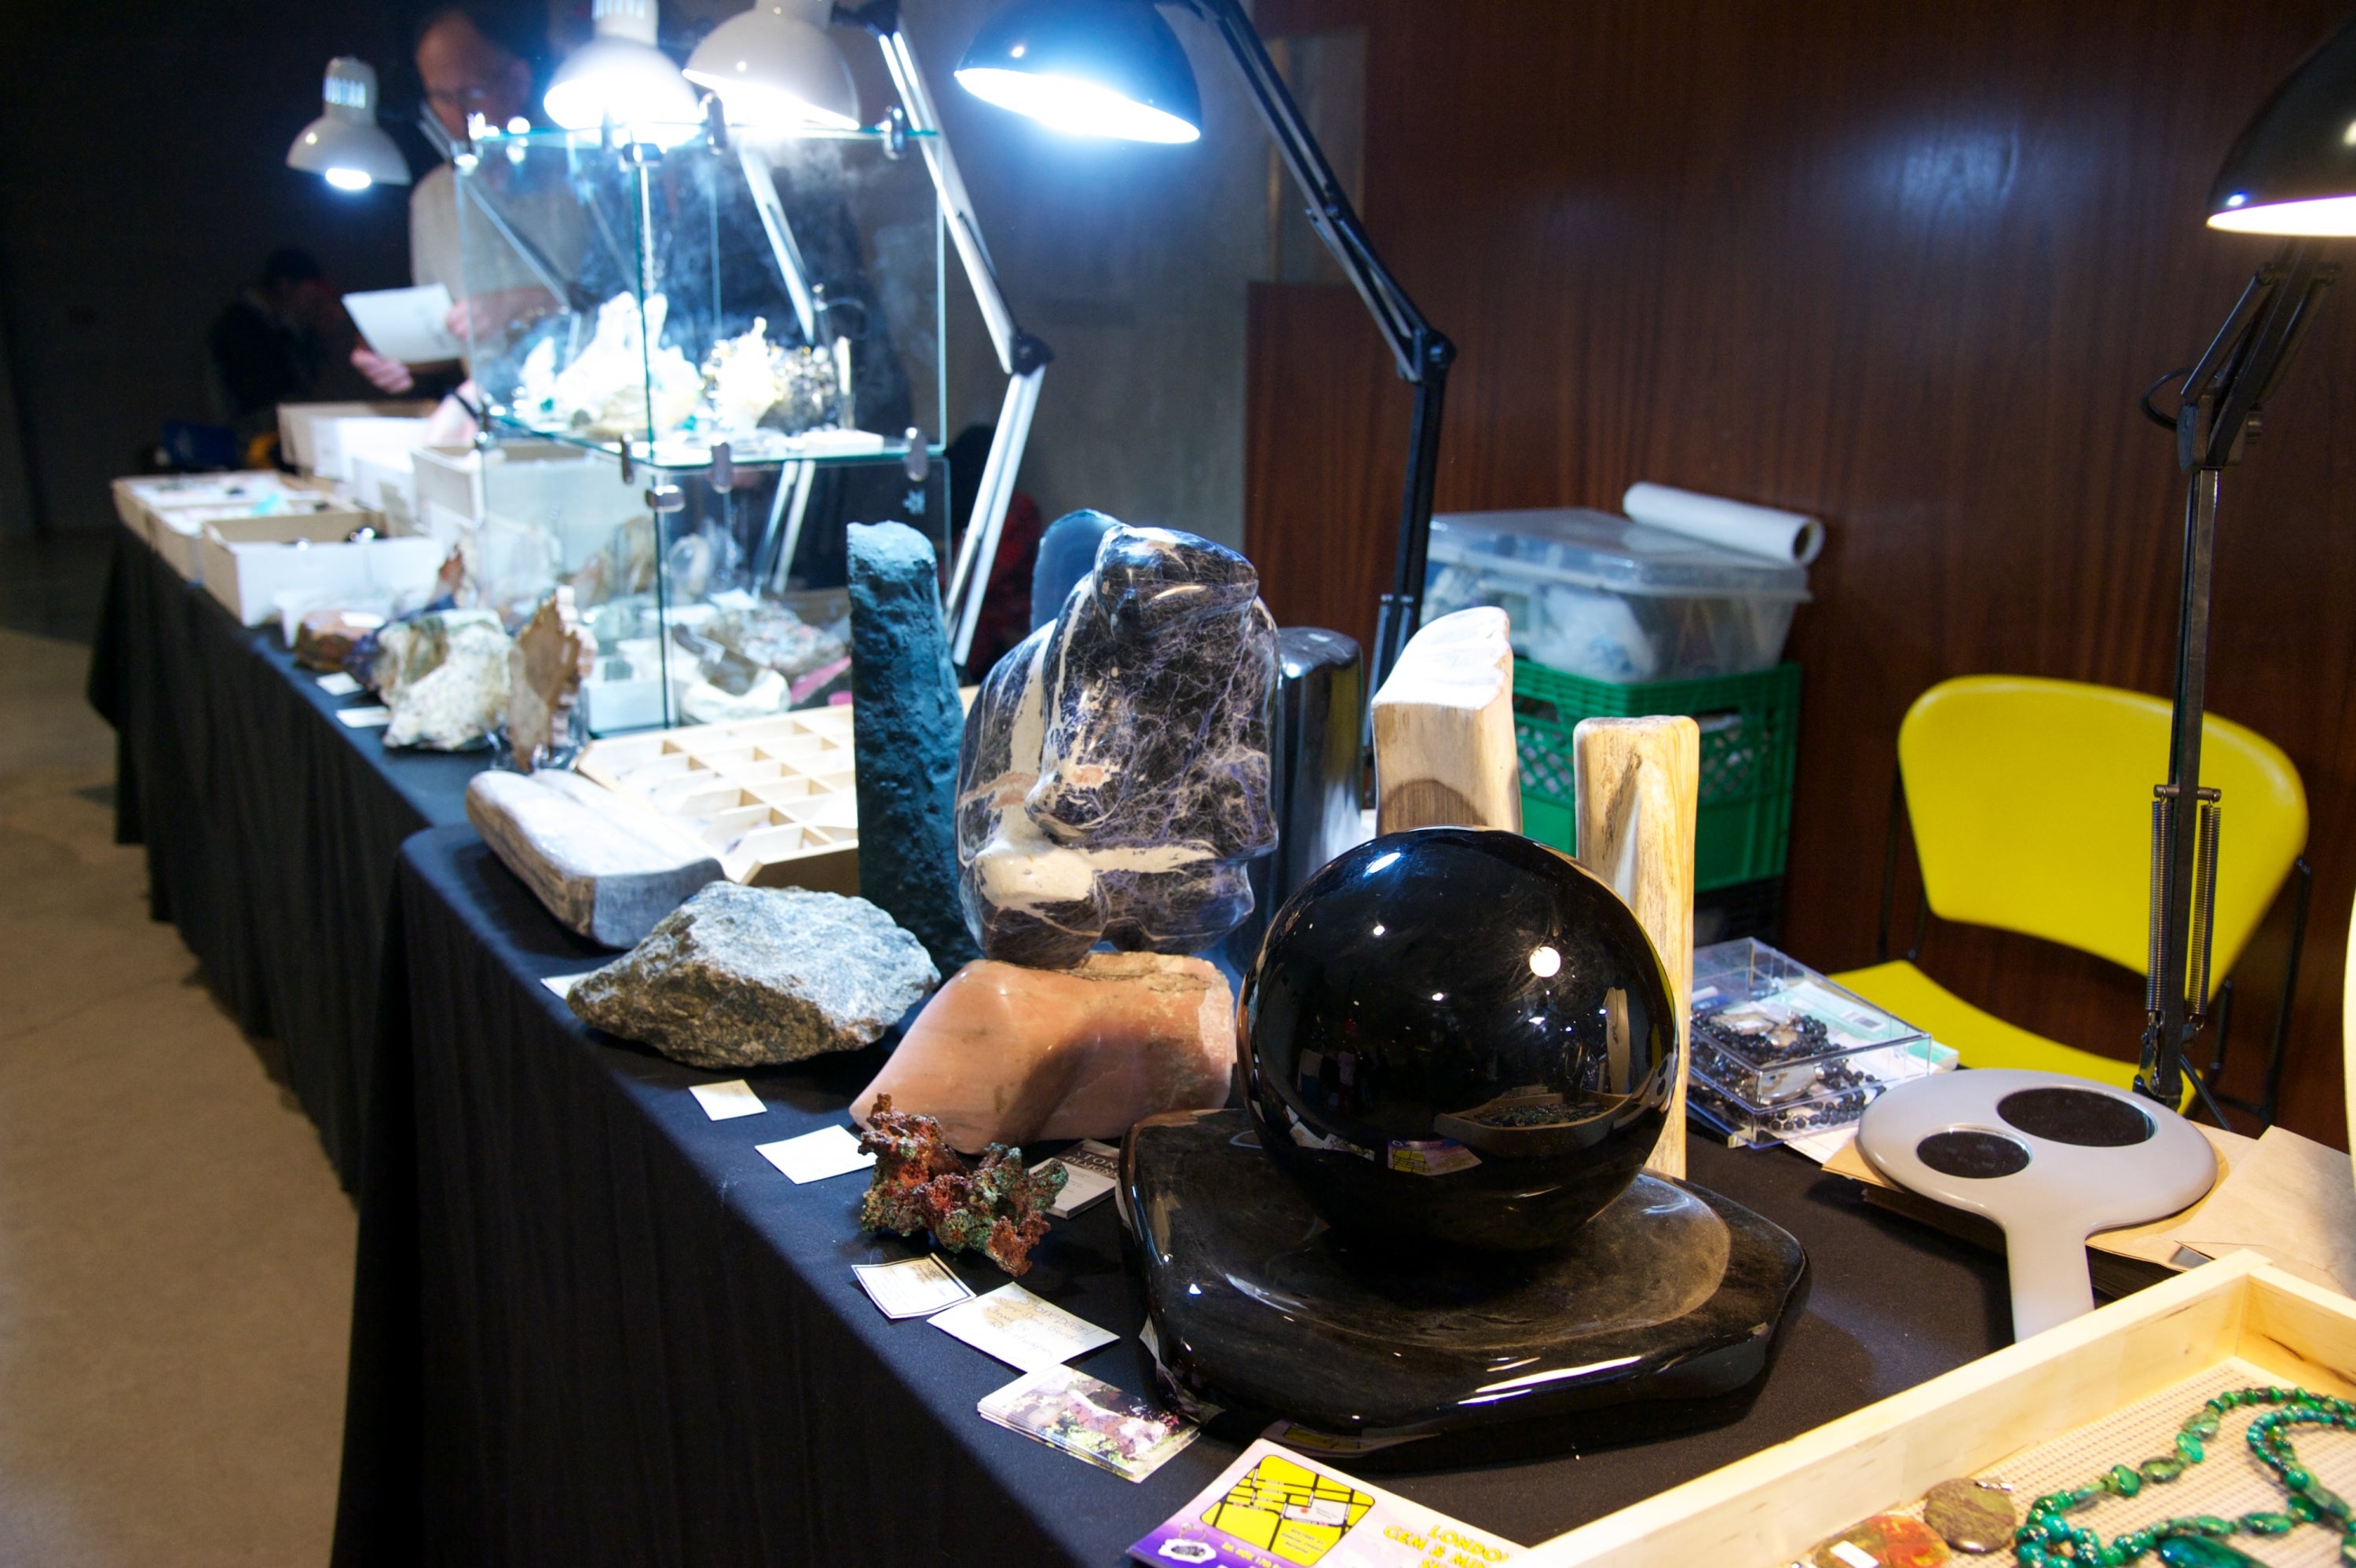 A gem vendor displaying his or her stock at the show.